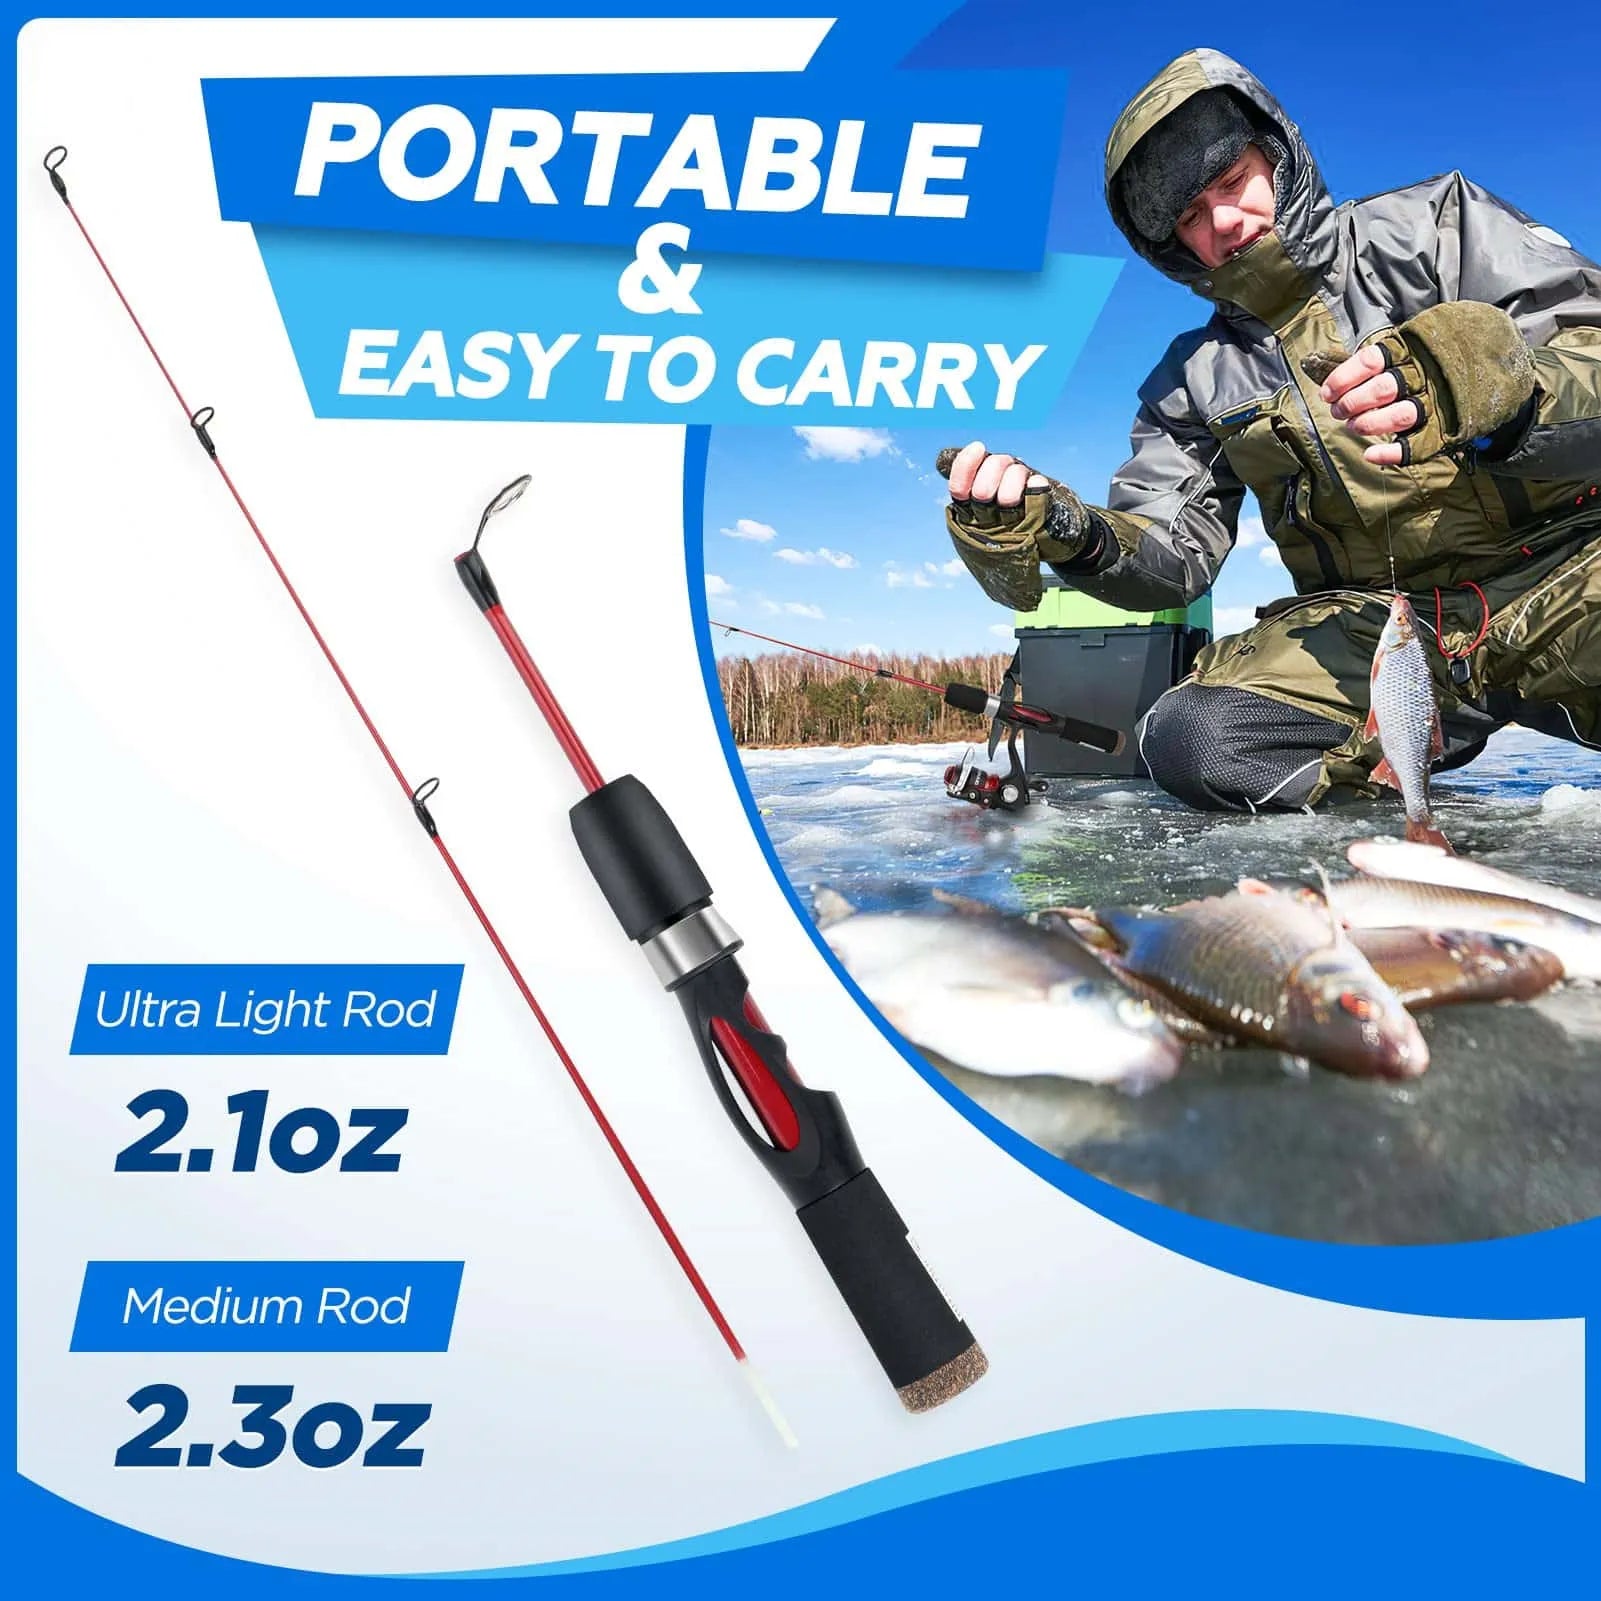 PLUSINNO ICE Ⅲ Ice Fishing Rod and Reel Combos Full Kit